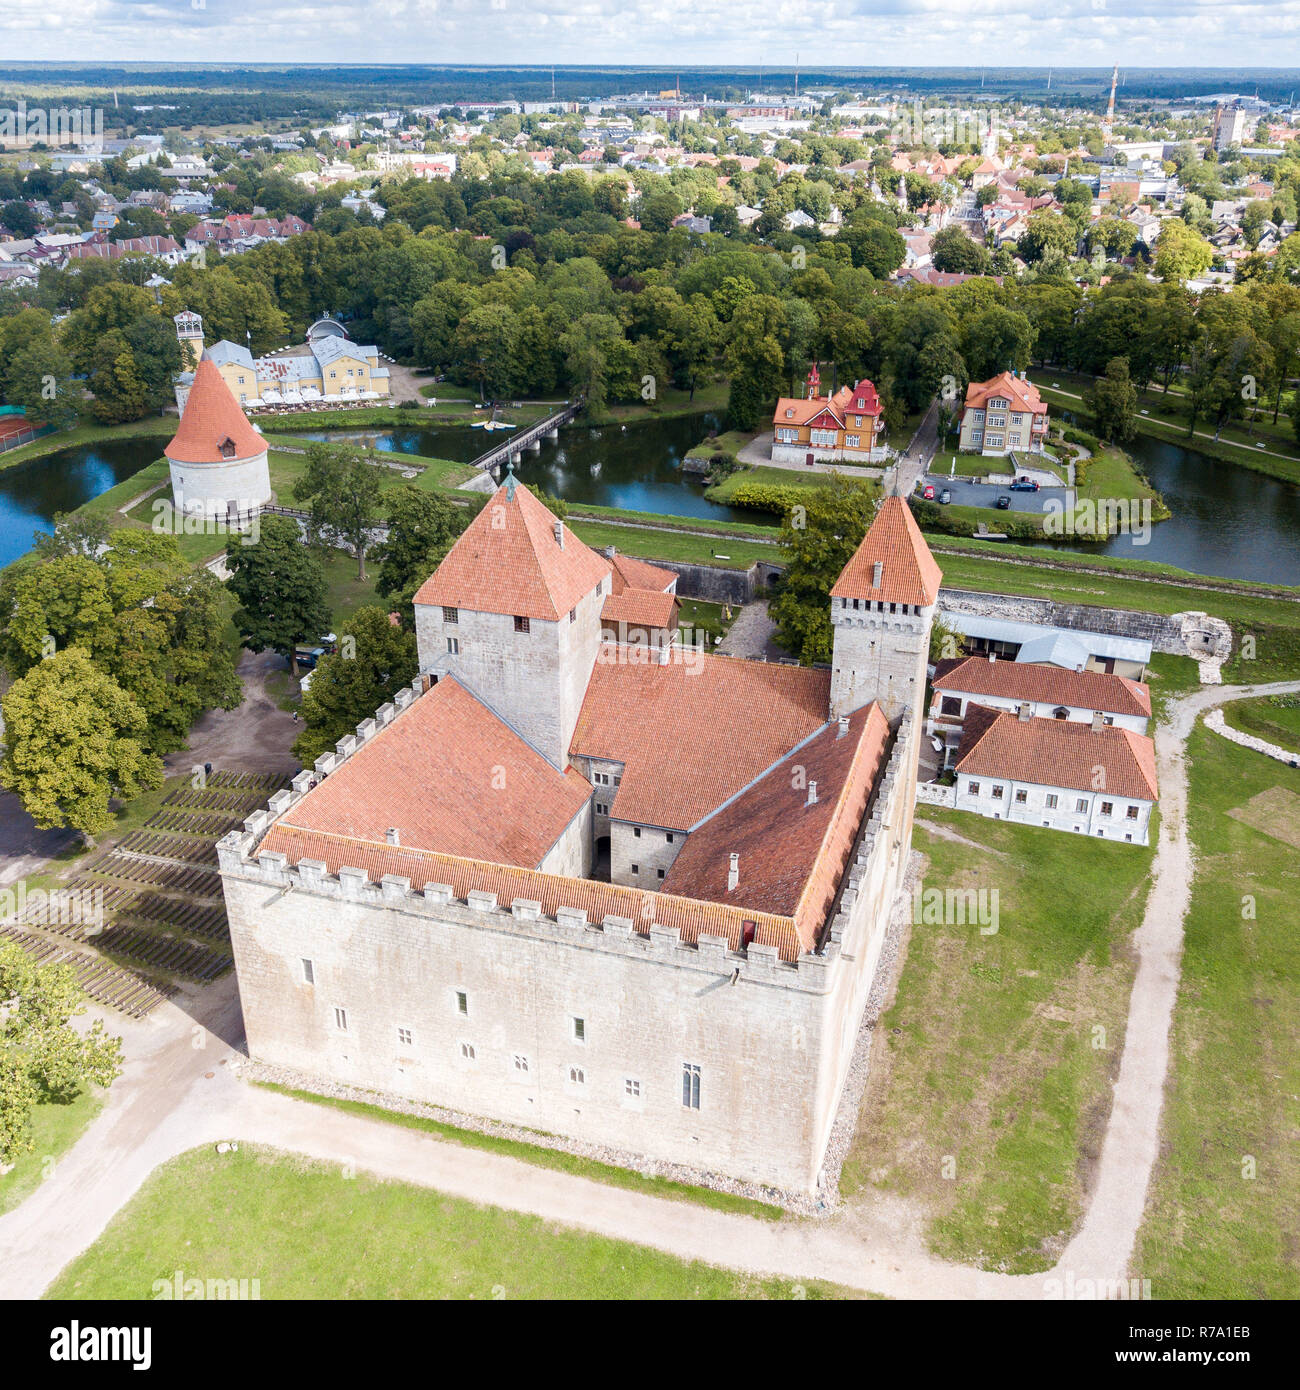 Fortifications of Kuressaare episcopal castle (star fort, bastion fortress) built by Teutonic Order, Saaremaa island, western Estonia, aerial view. Stock Photo